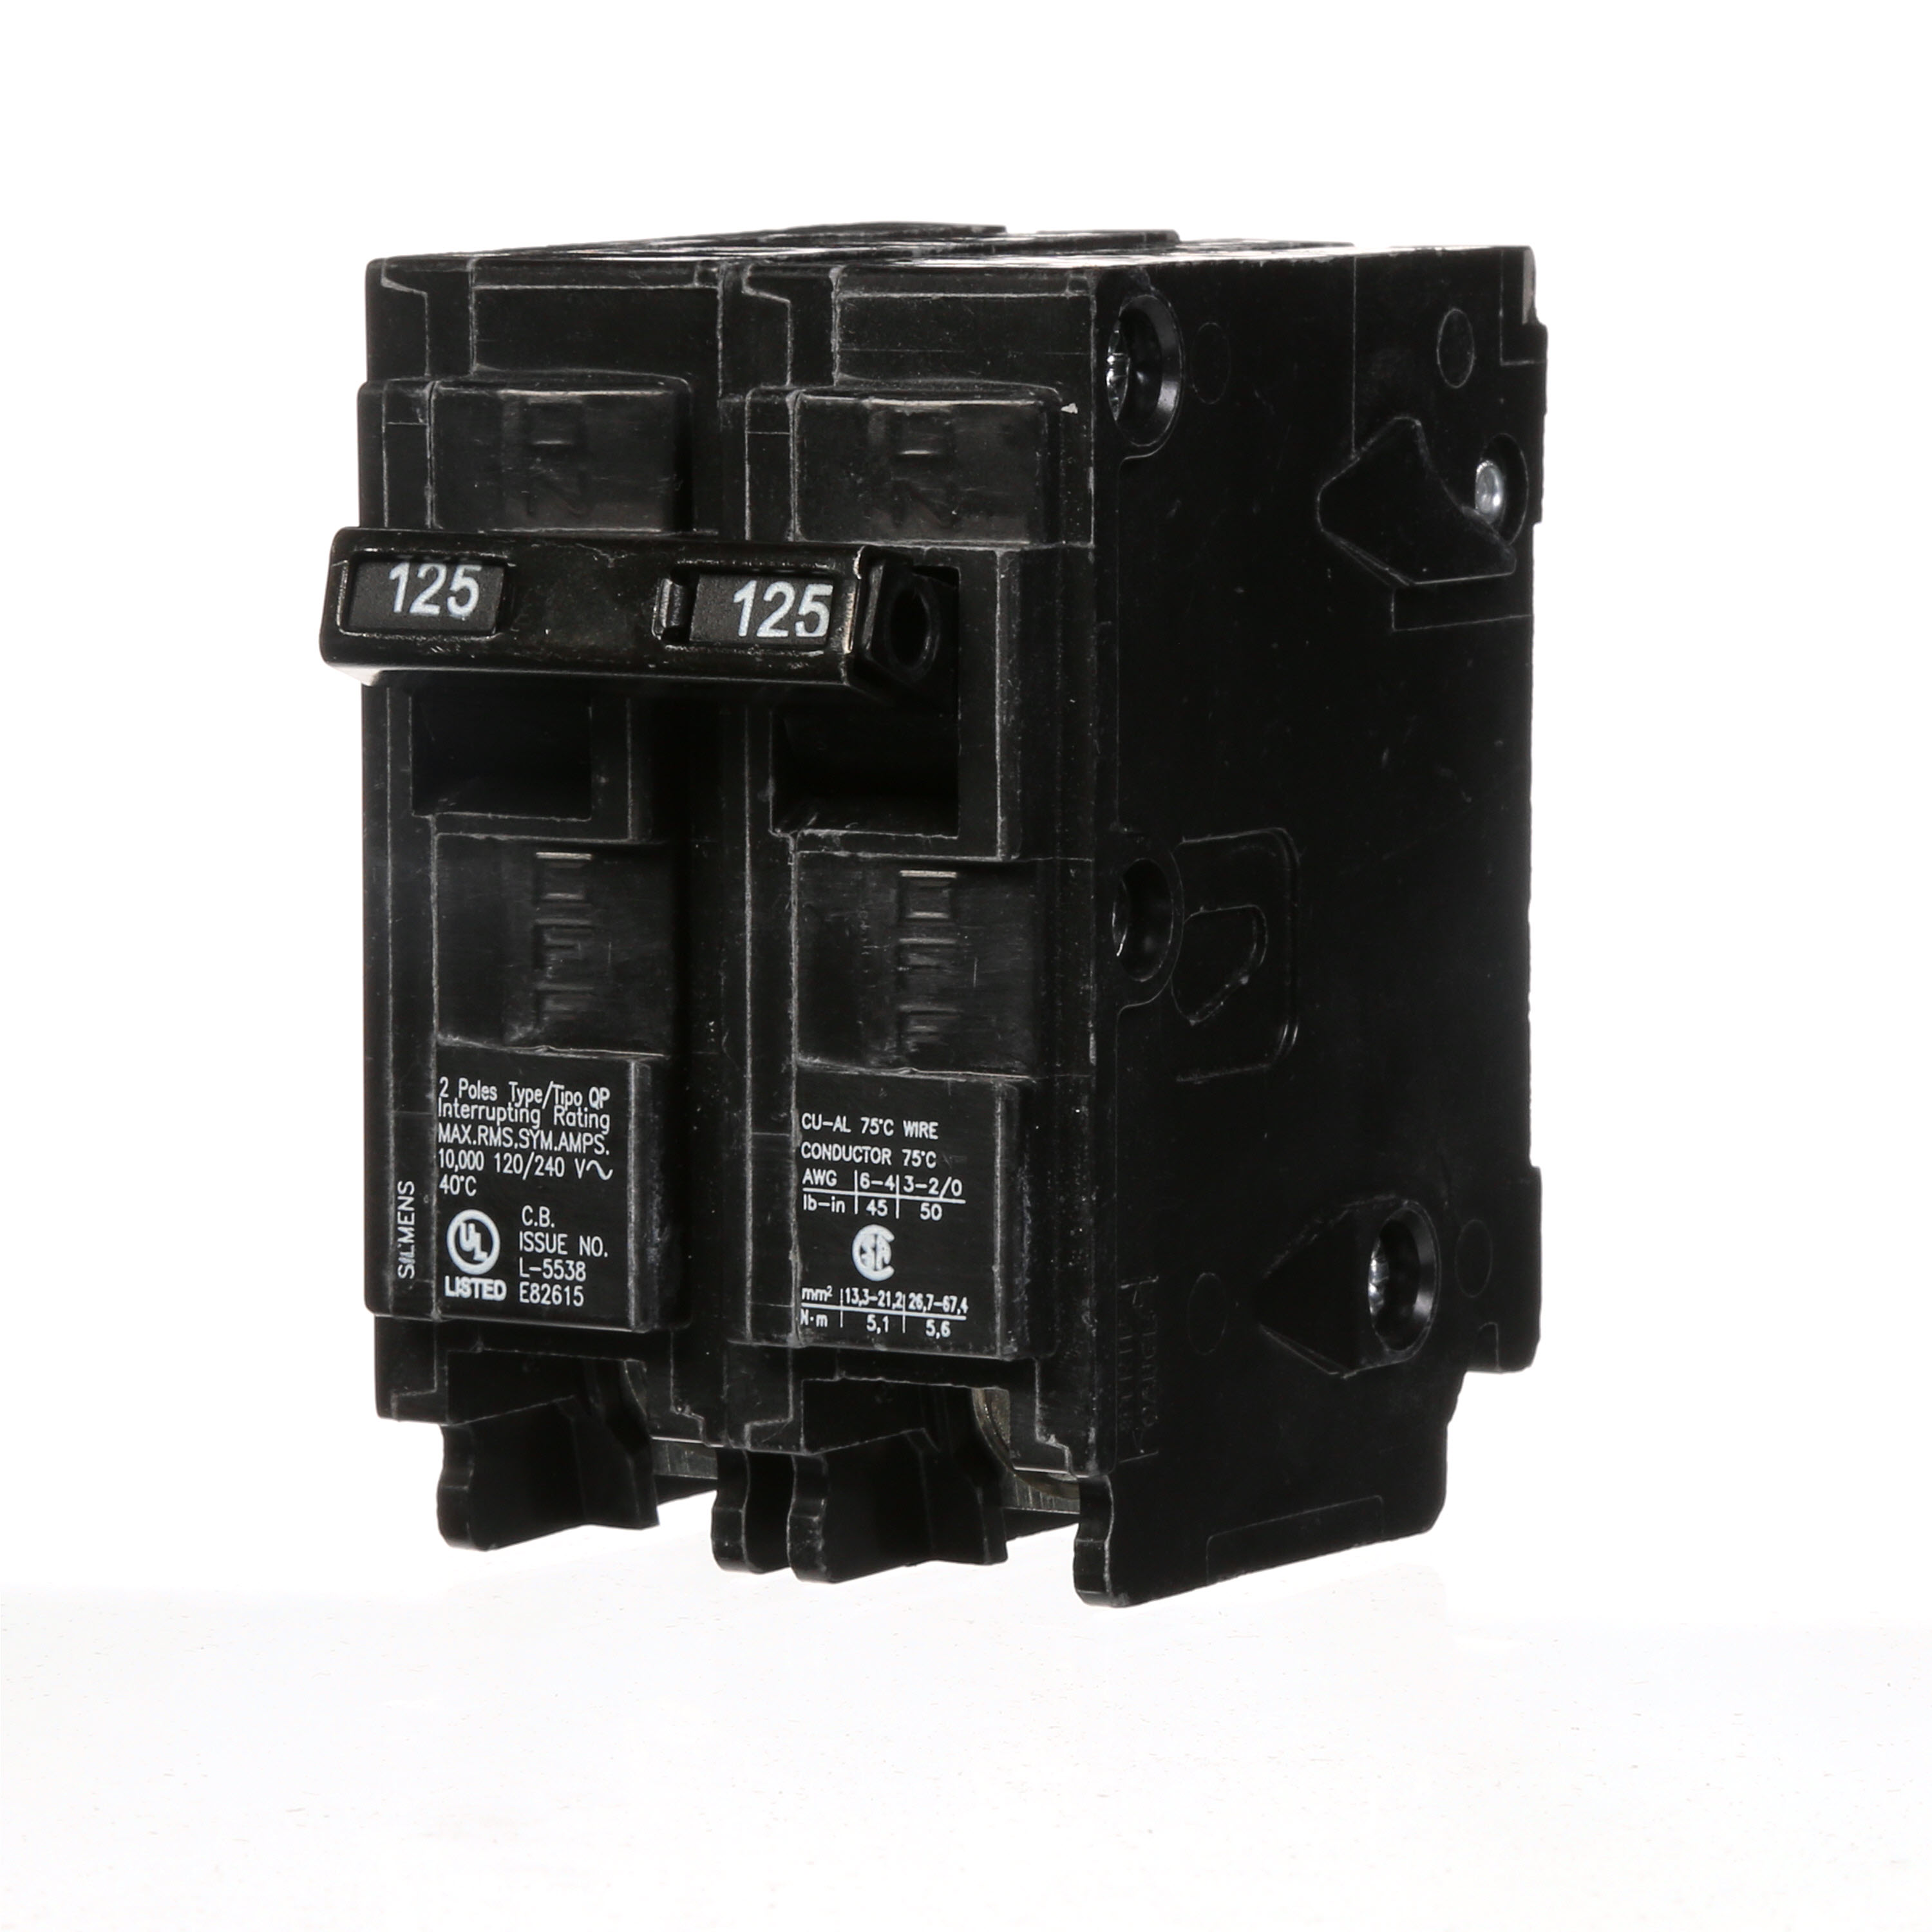 Siemens Low Voltage Residential Circuit Breakers Miniature Thermal Mag Circuit Breakers - Type QP/MP, 2-Pole, 120/240VAC are Circuit Protection Load Center Mains, Feeders, and Miniature Circuit Breakers. Type QP/MP Application Electrical Distribution Standard UL 489 Voltage Rating 120/240V Amperage Rating 125A Trip Range Thermal Magnetic Interrupt Rating 10 AIC Number Of Poles 2P